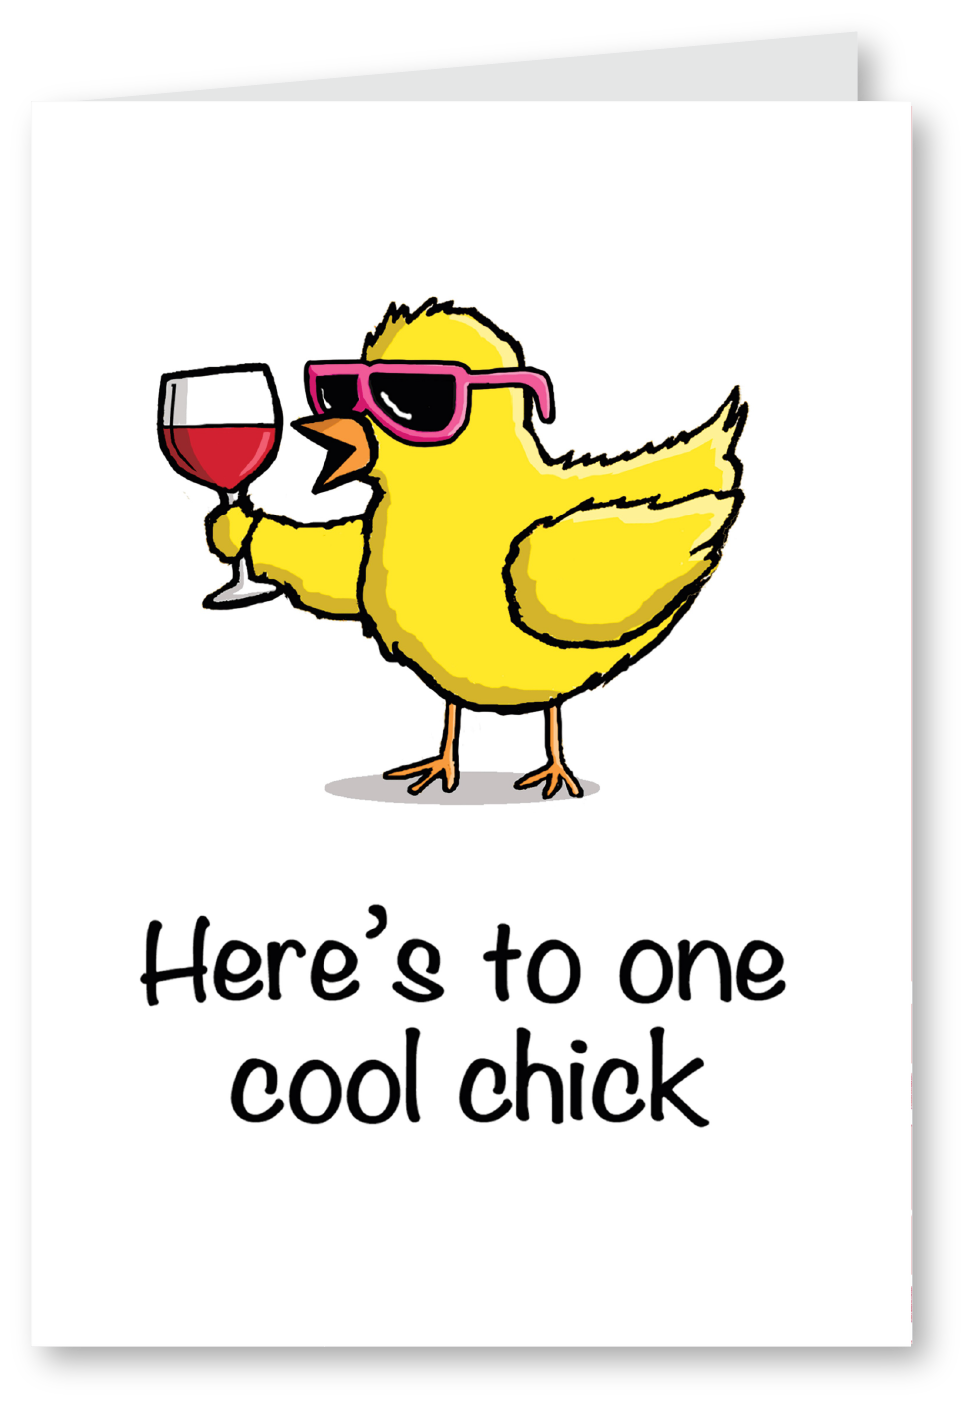 Here's to one cool chick